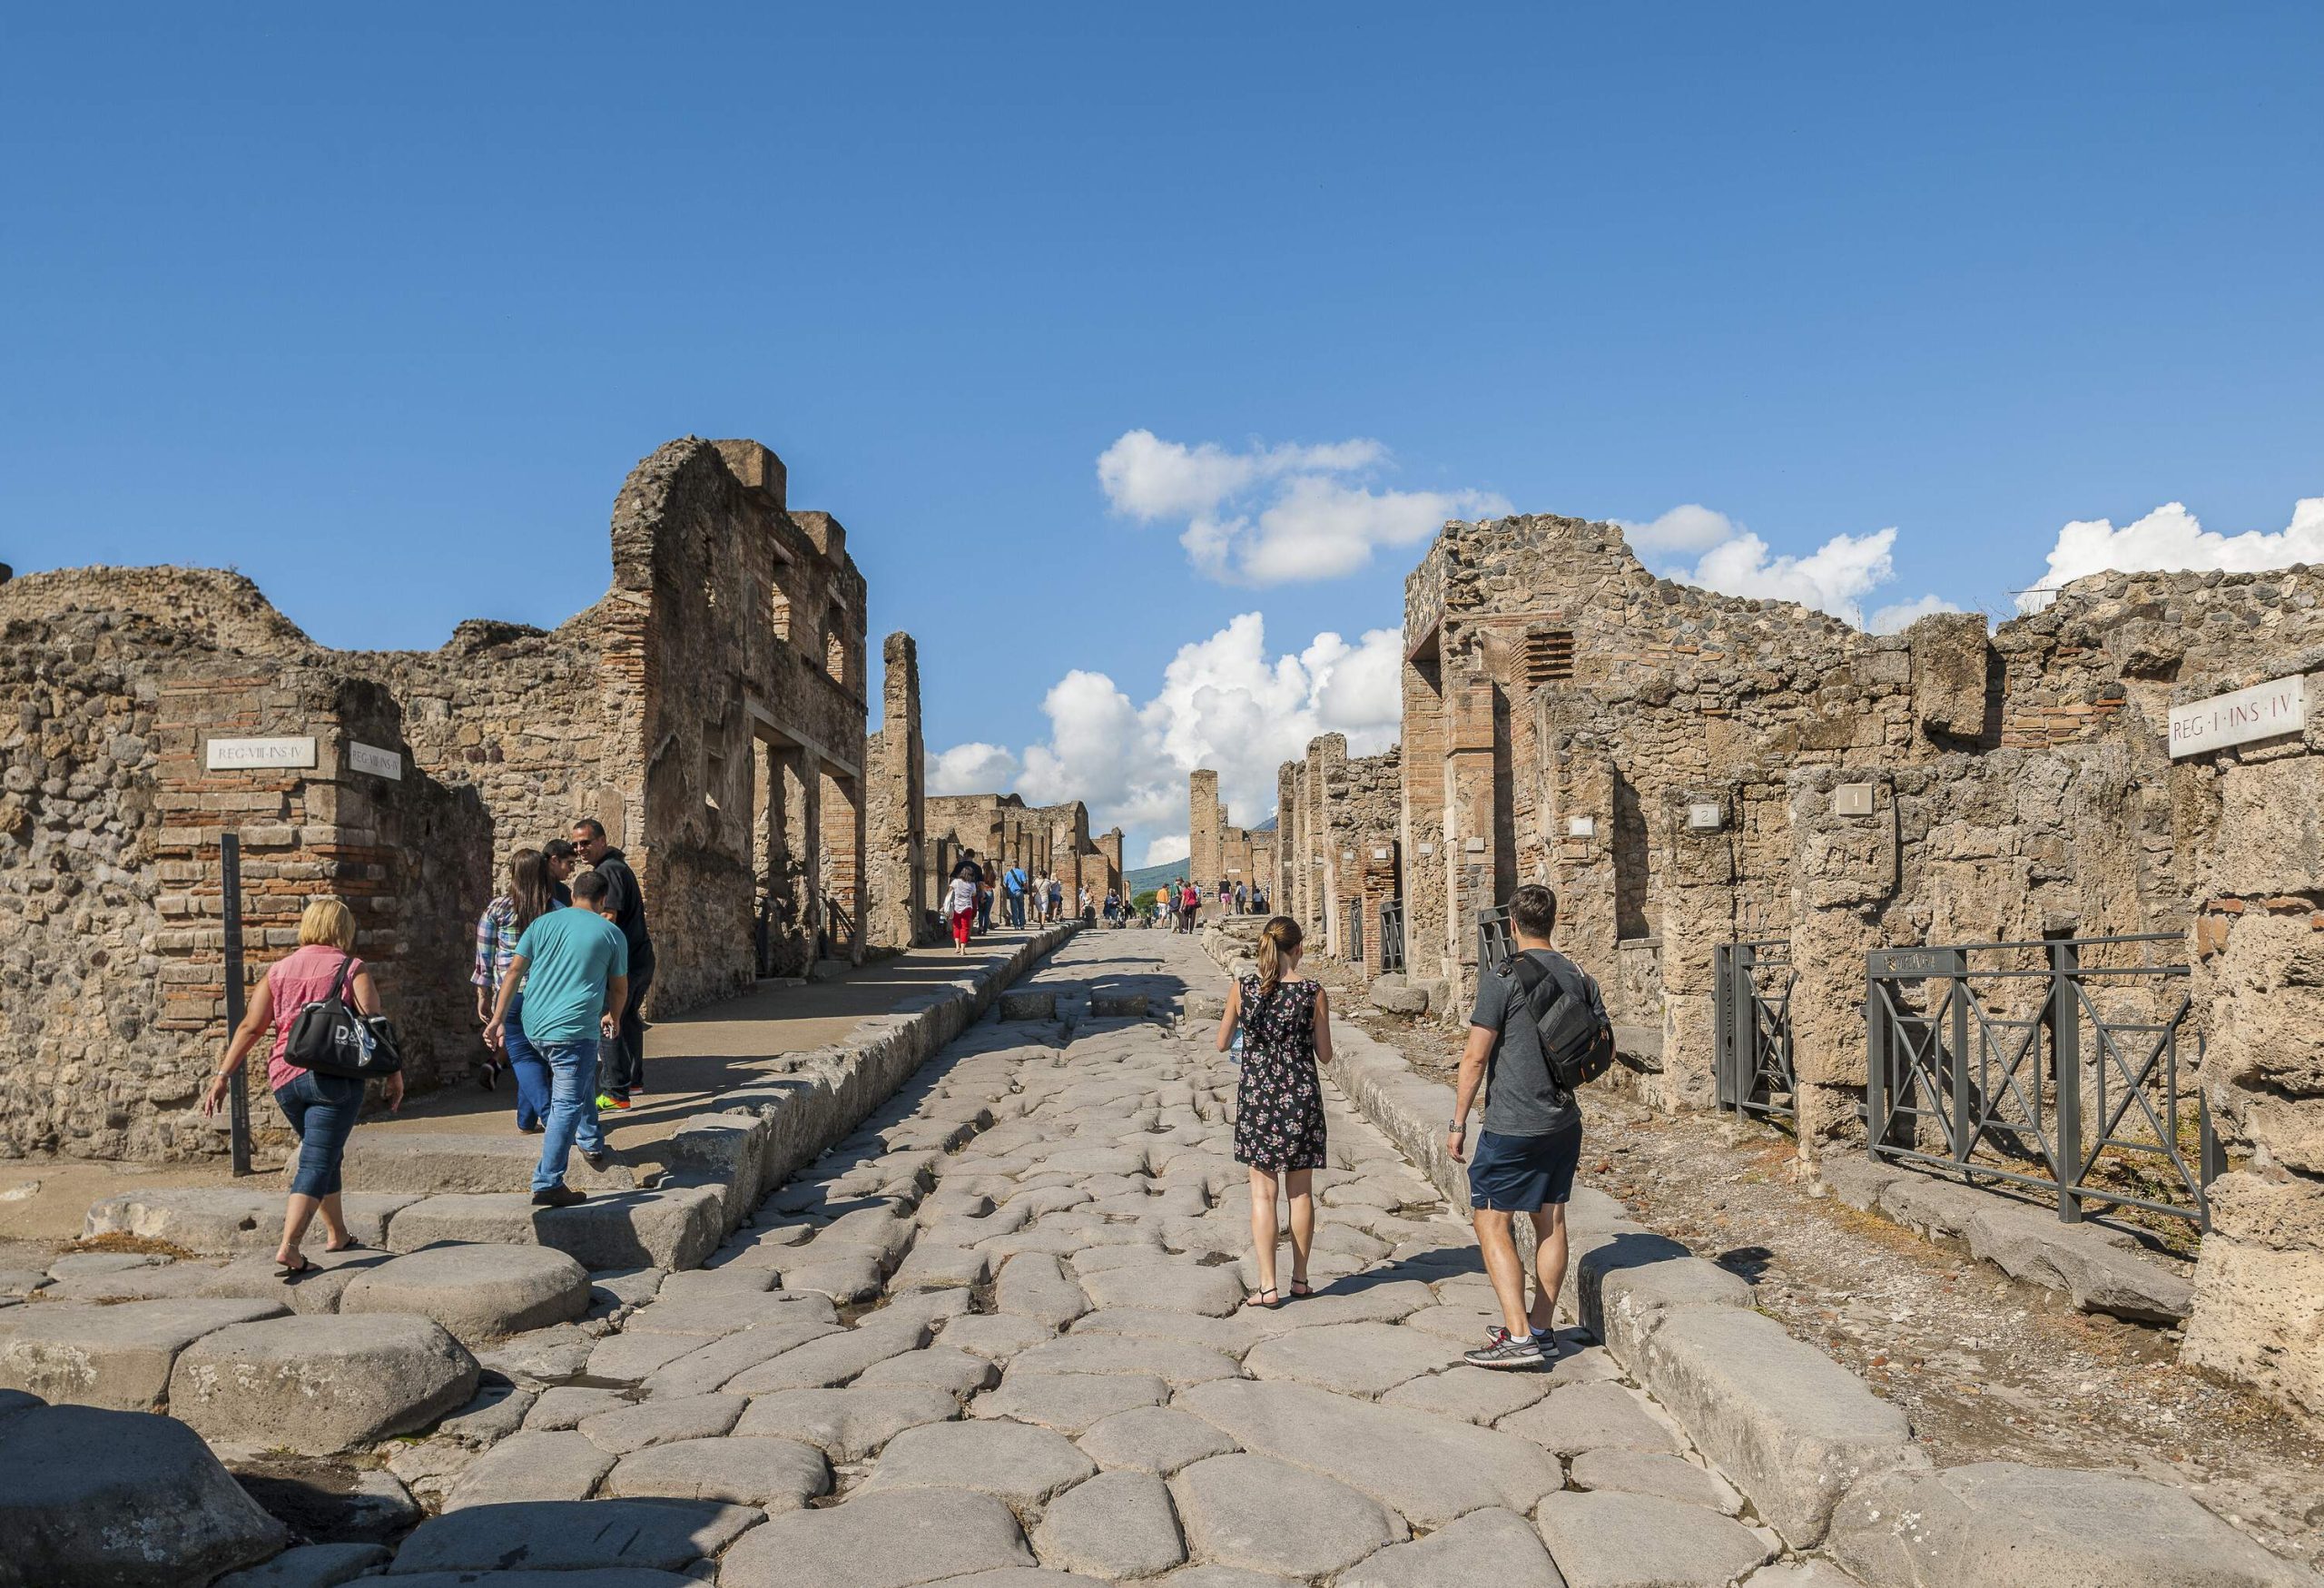 Tourists stroll on a cobblestone street along the ruins of an archaeological site.